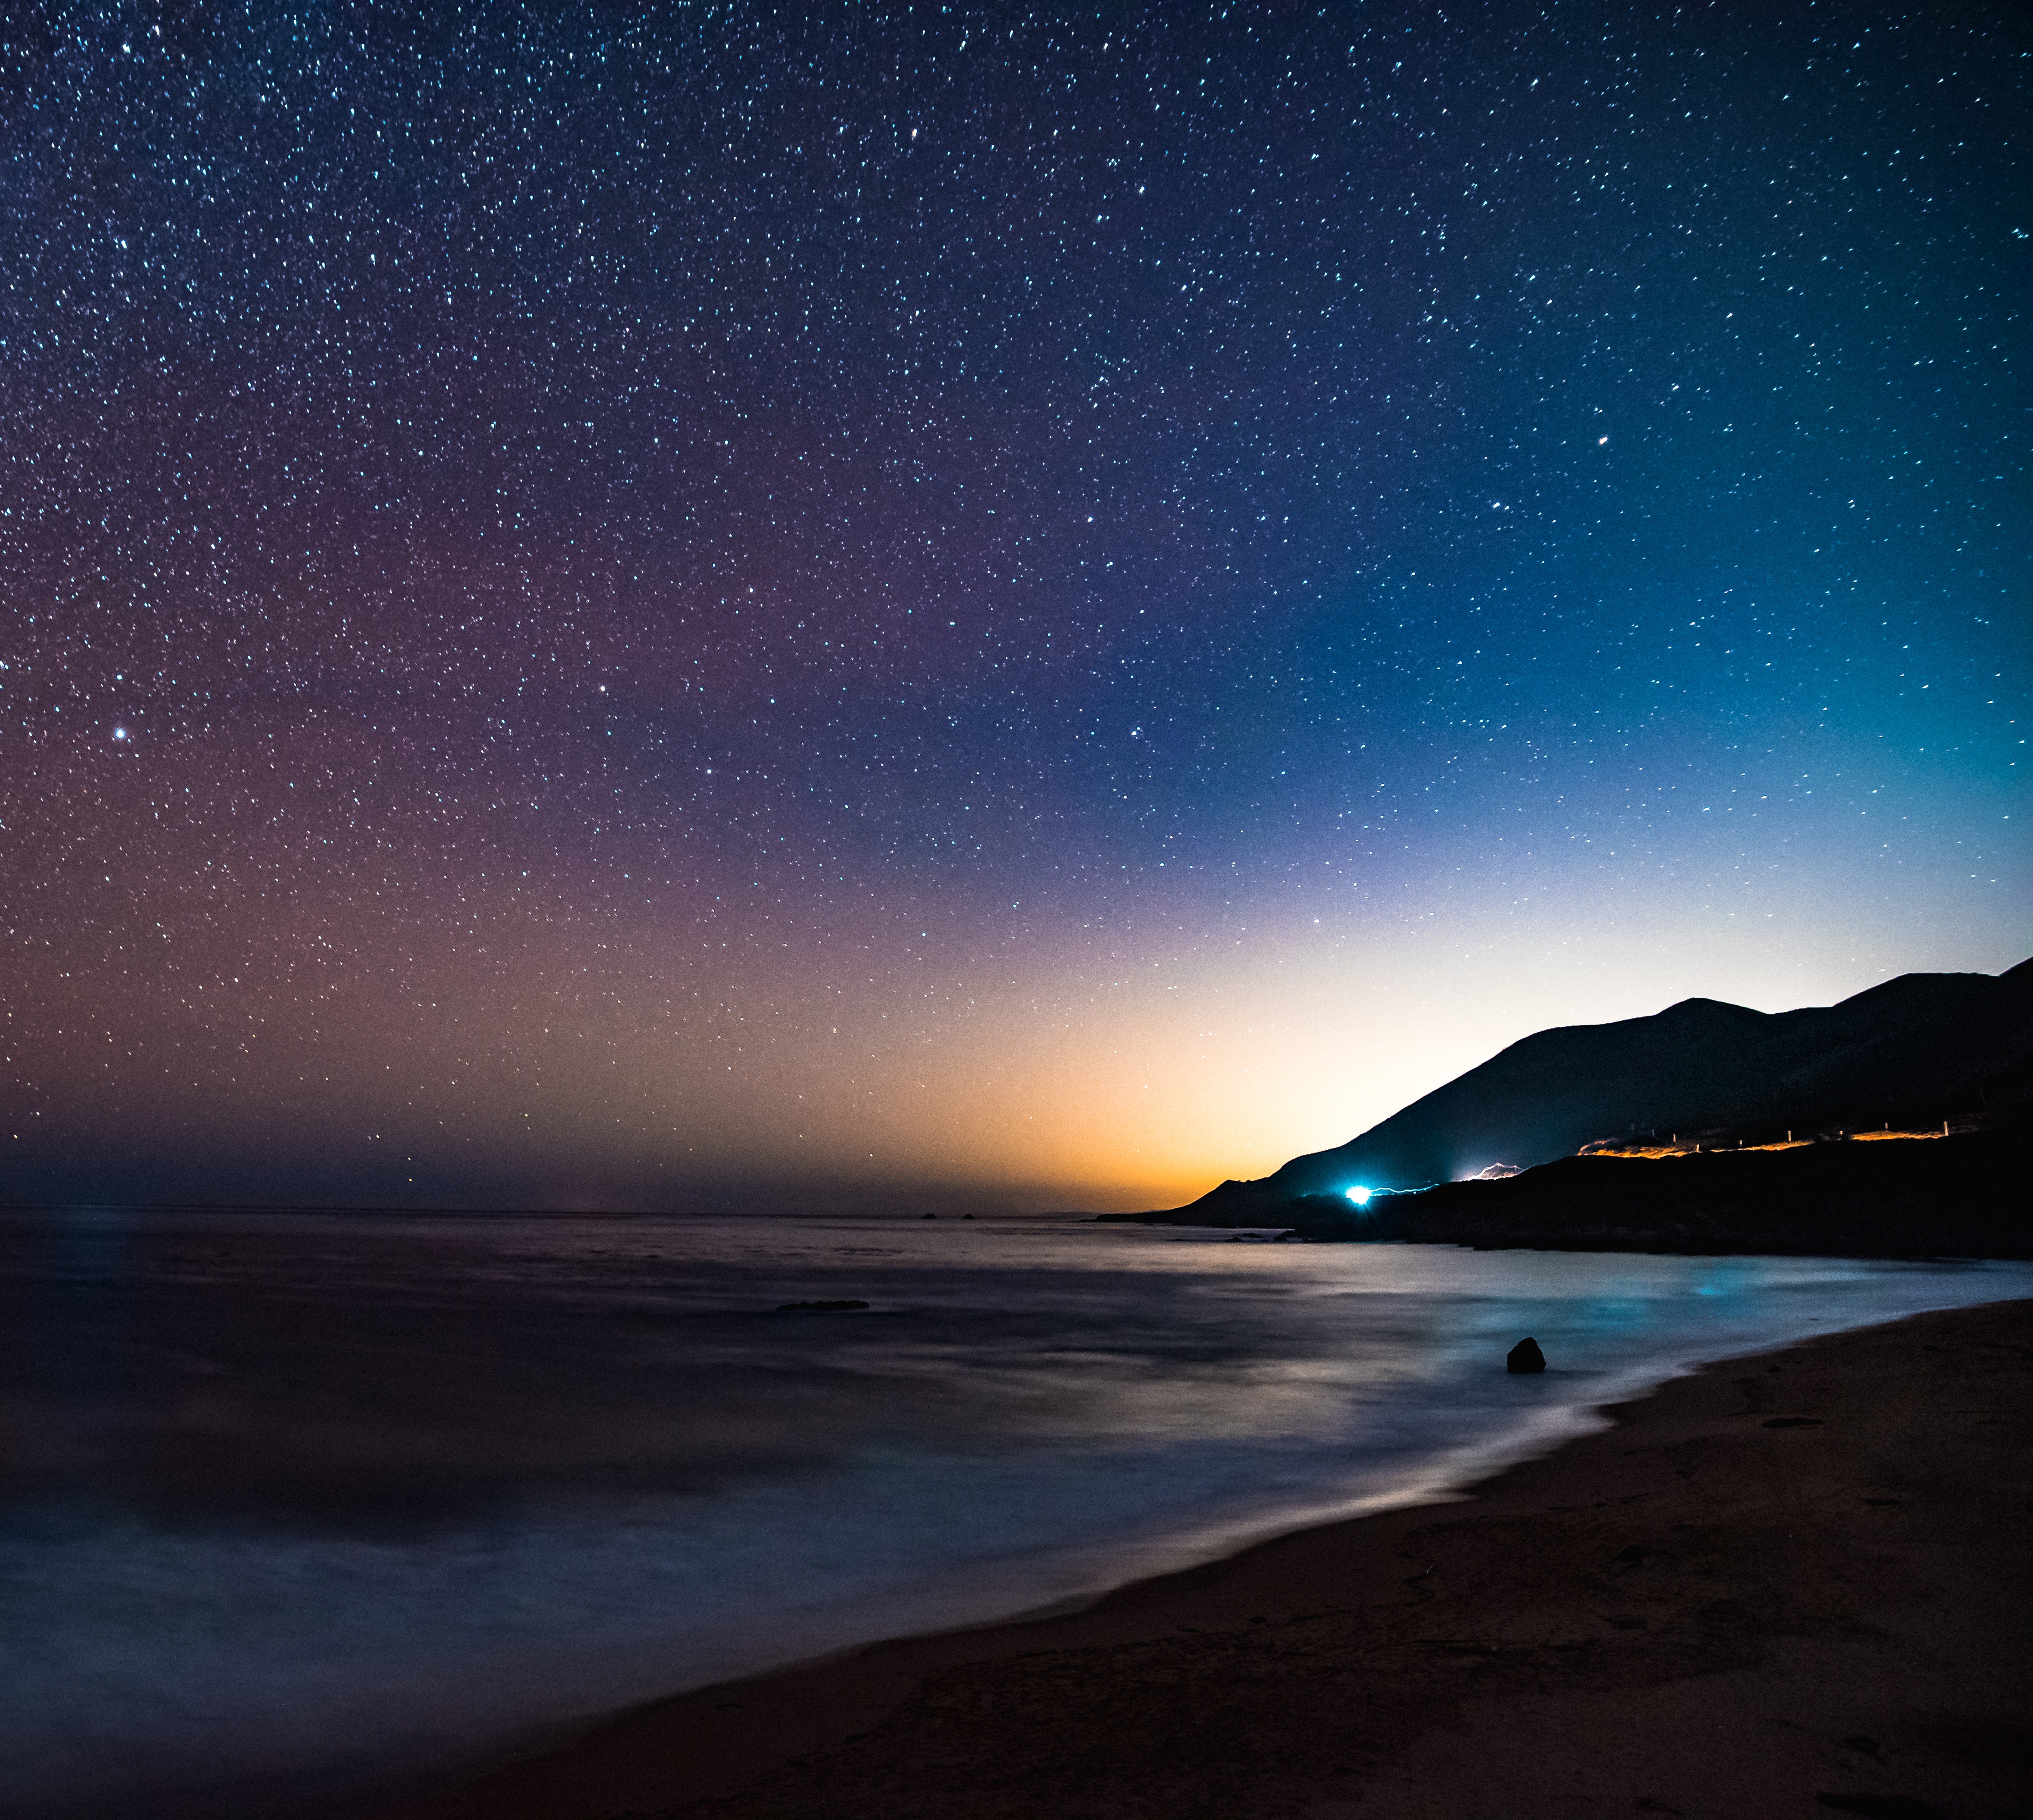 88704 download wallpaper starry sky, nature, mountains, sea, stars, night, shore, bank screensavers and pictures for free